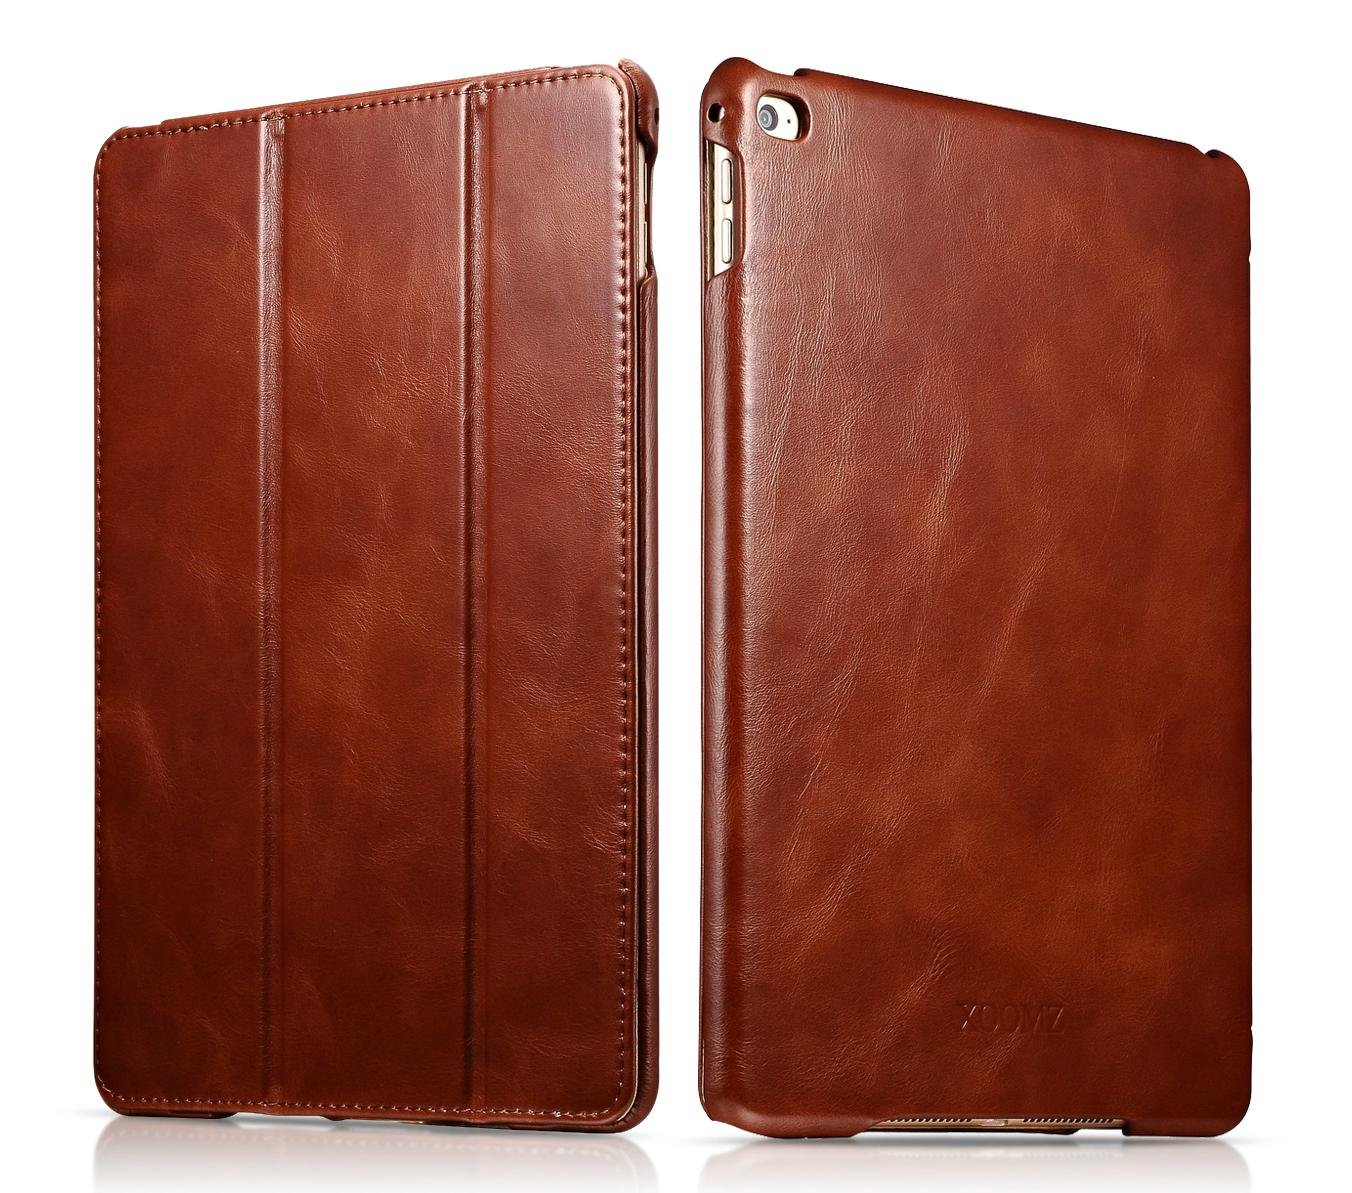 iCarer iPad Air 2/ iPad 6 Vintage Series Genuine Leather Stand Case Cover